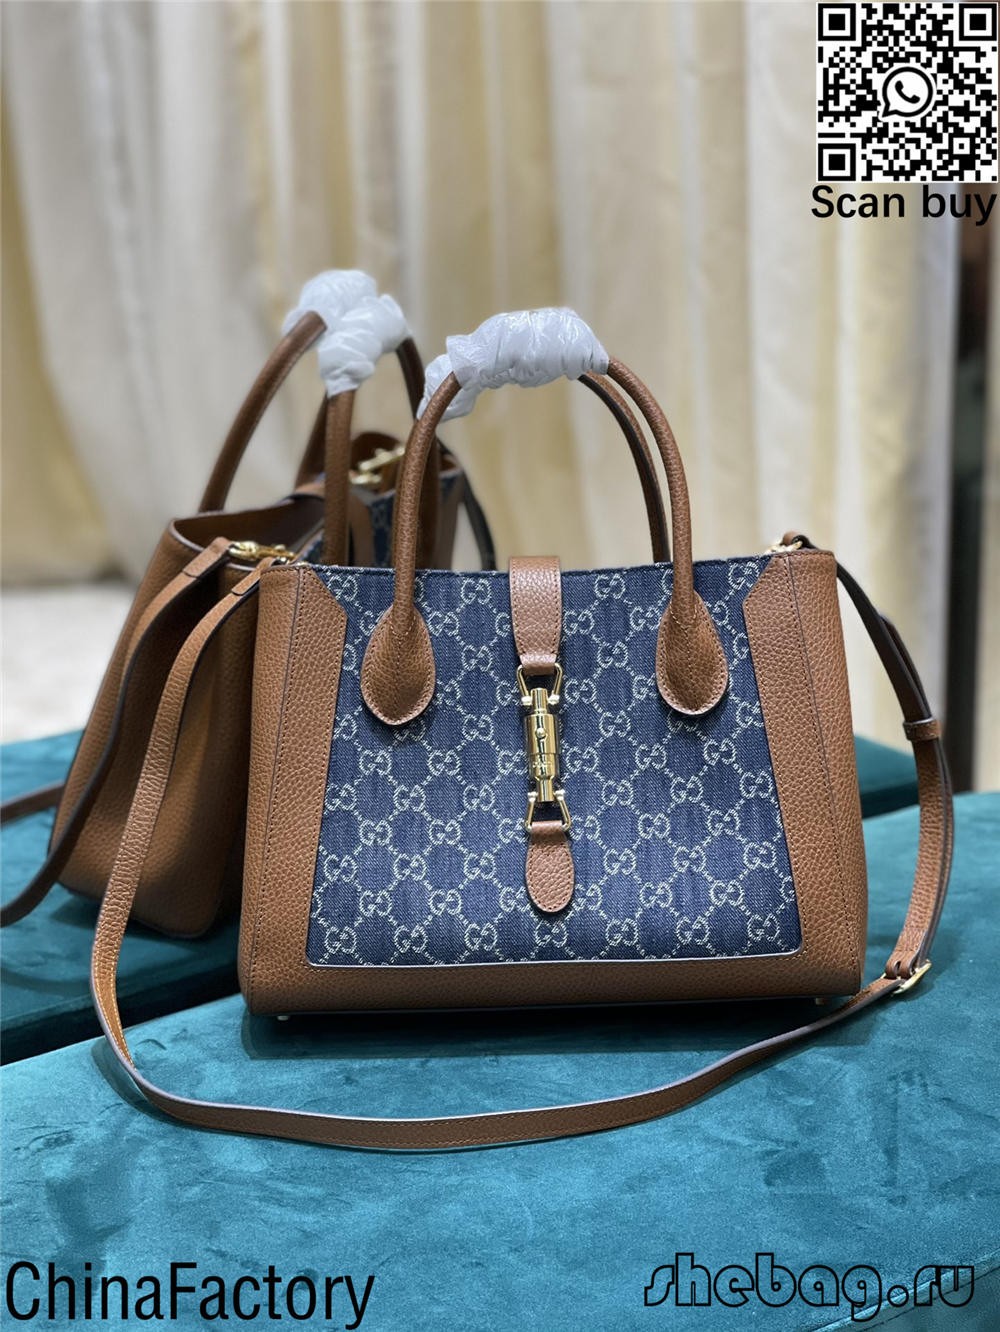 Top 10 Most worth buying lightweight replica designer bags review (2022 updated)-Best Quality Fake Louis Vuitton Bag Online Store, Replica designer bag ru